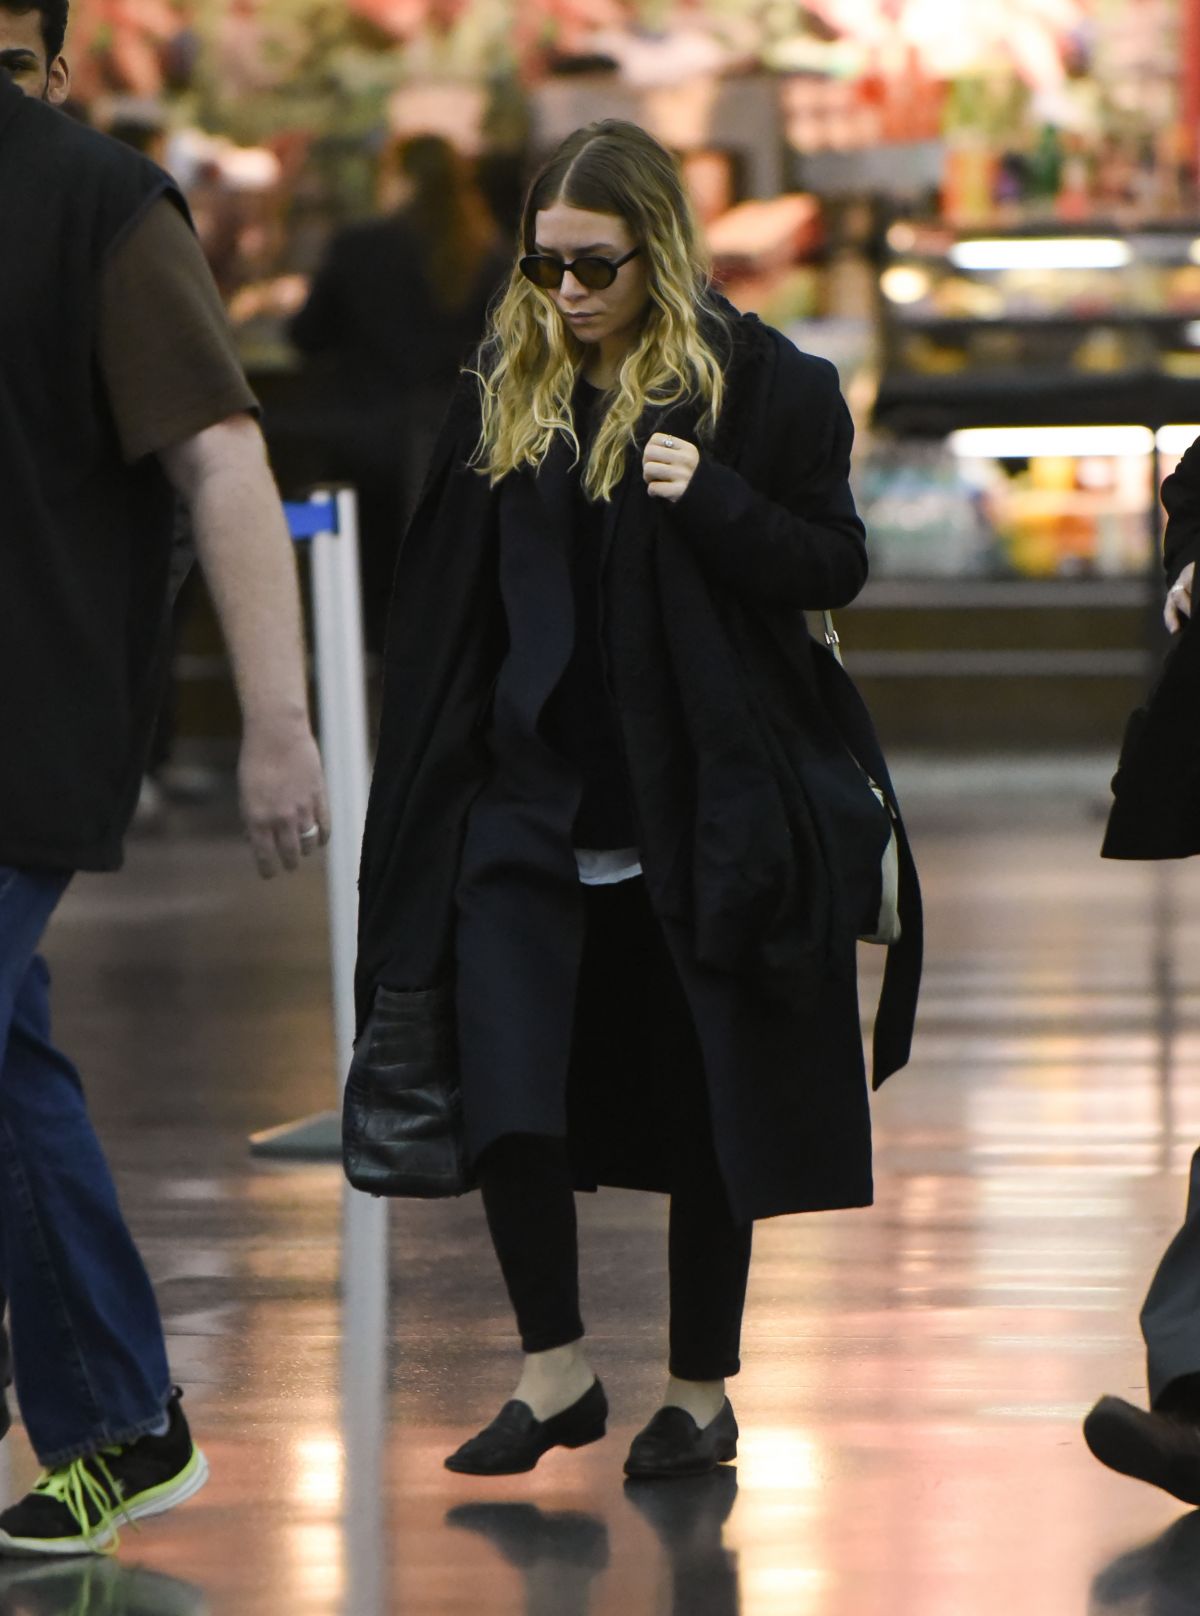 MARY KATE OLSEN at JFK Airport in New York – HawtCelebs